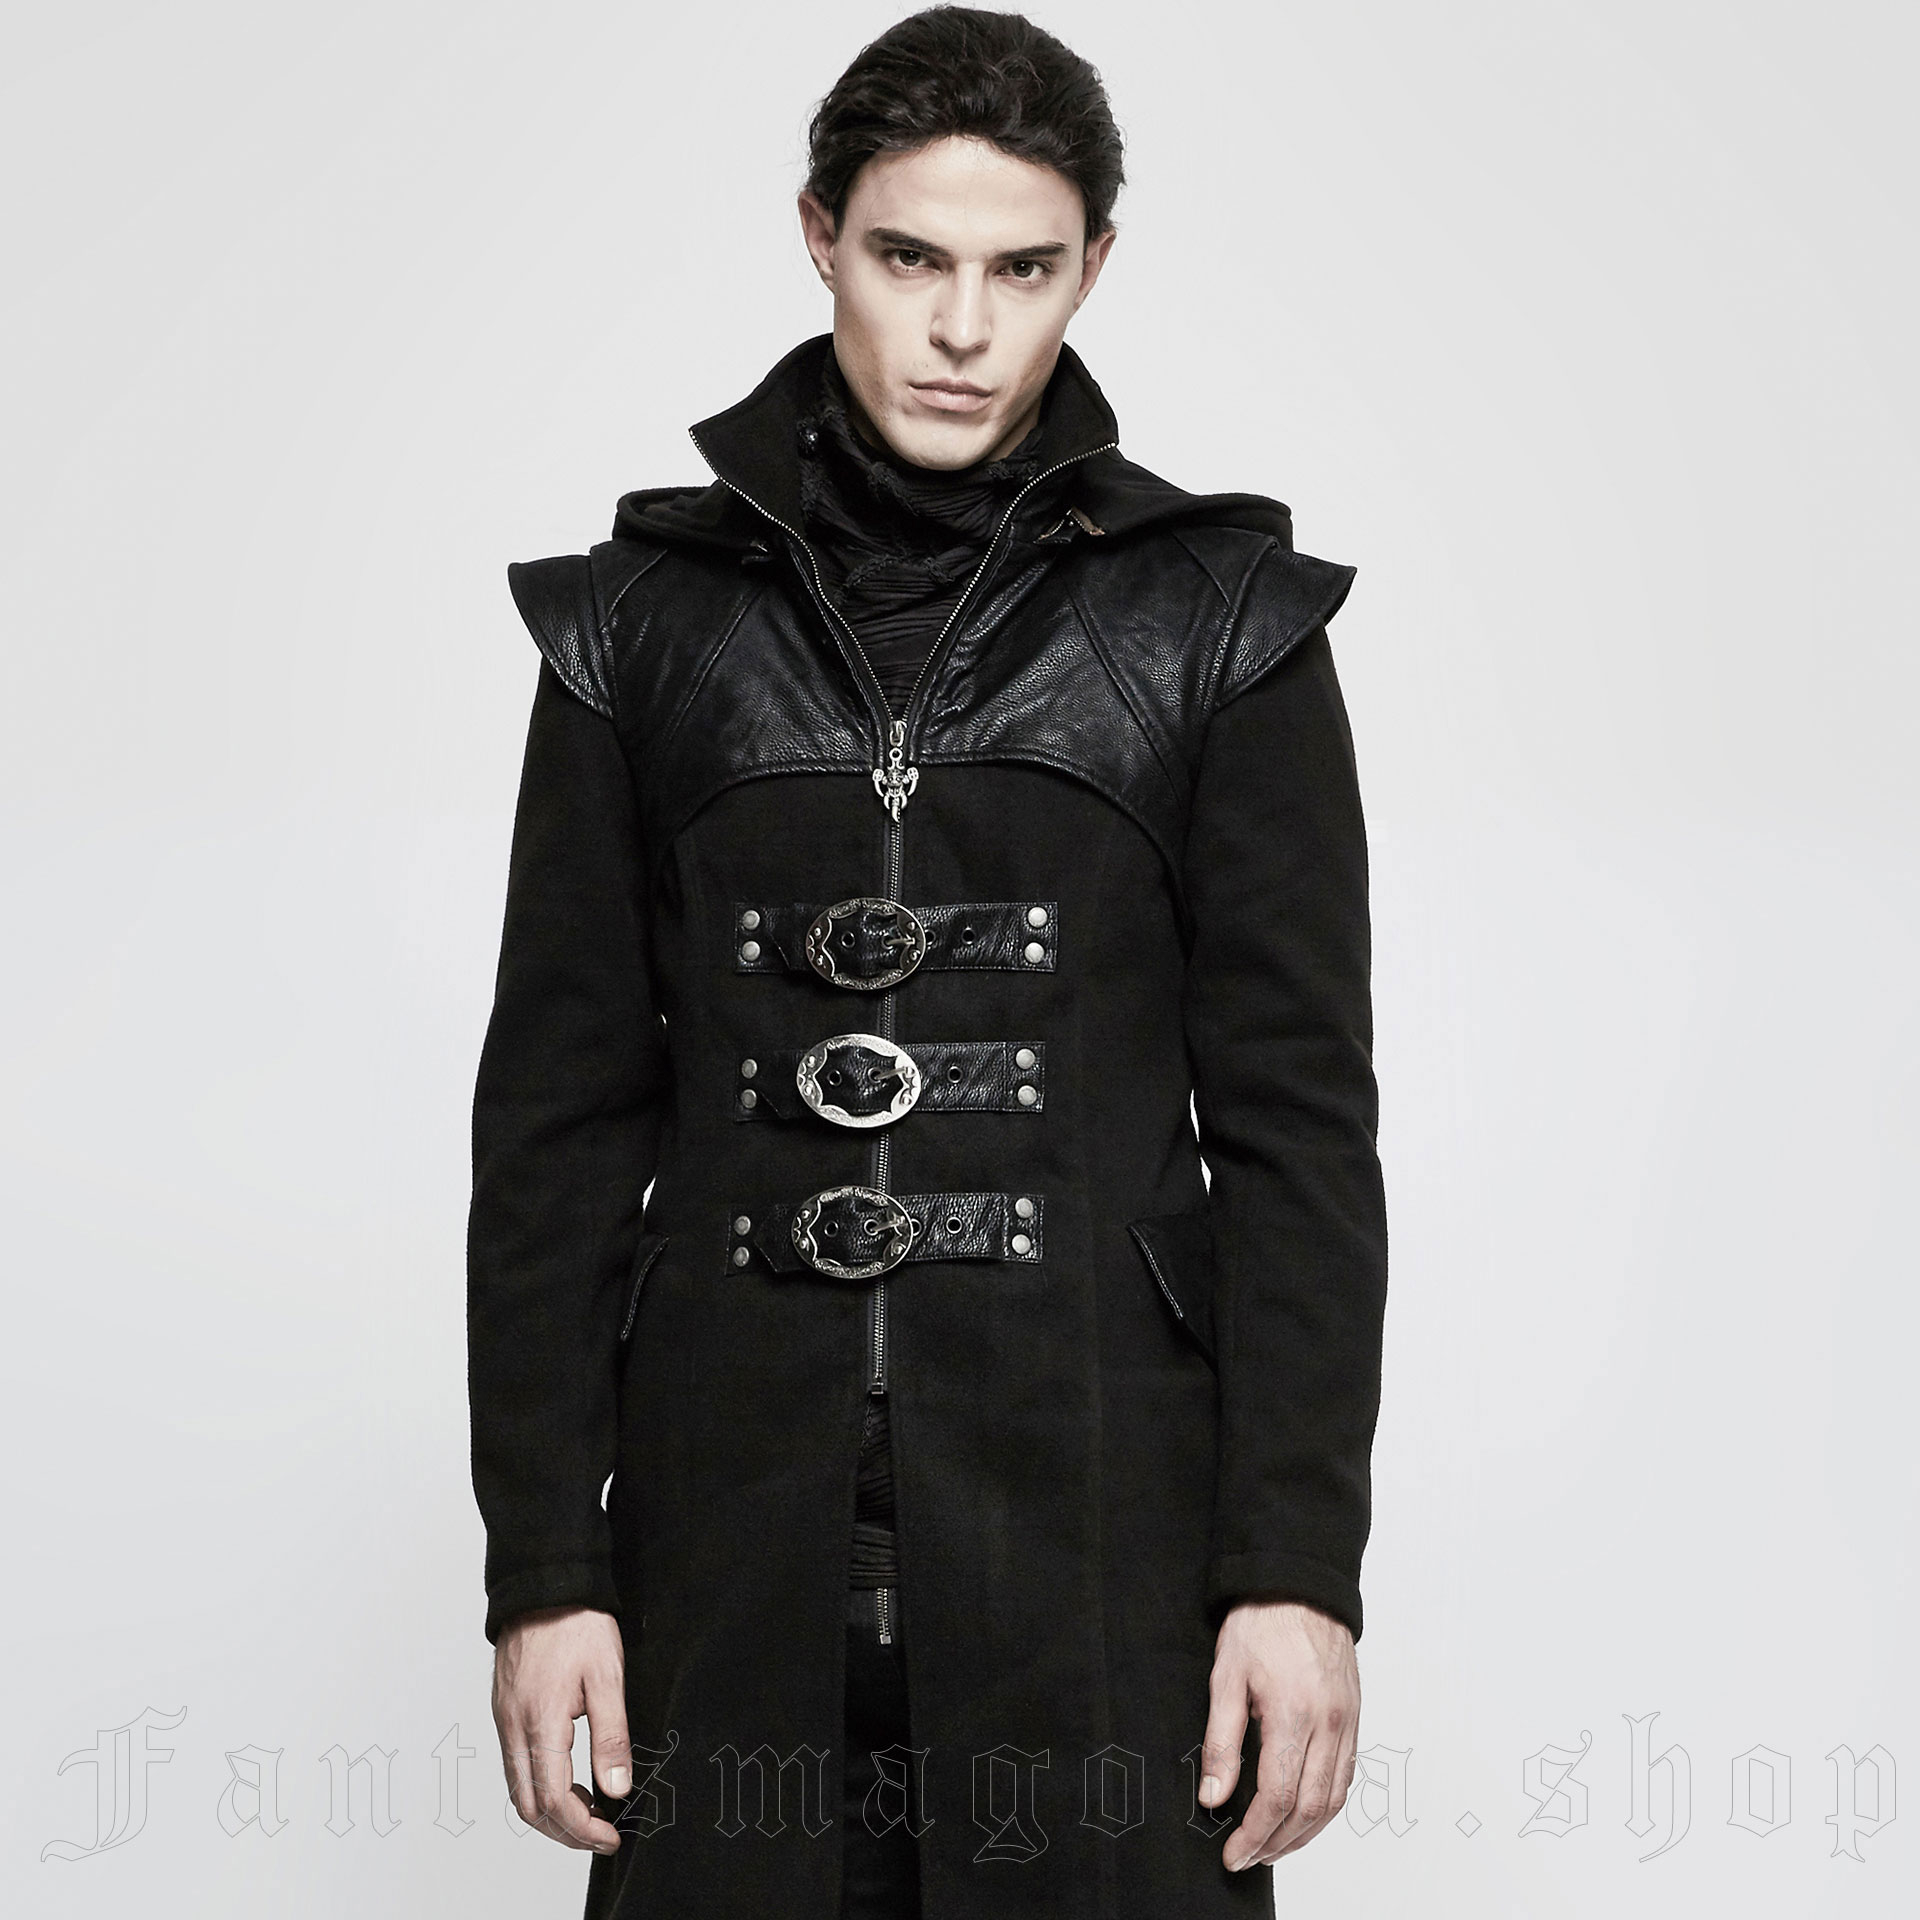 Assassin'S Creed Coat by Punk Rave brand